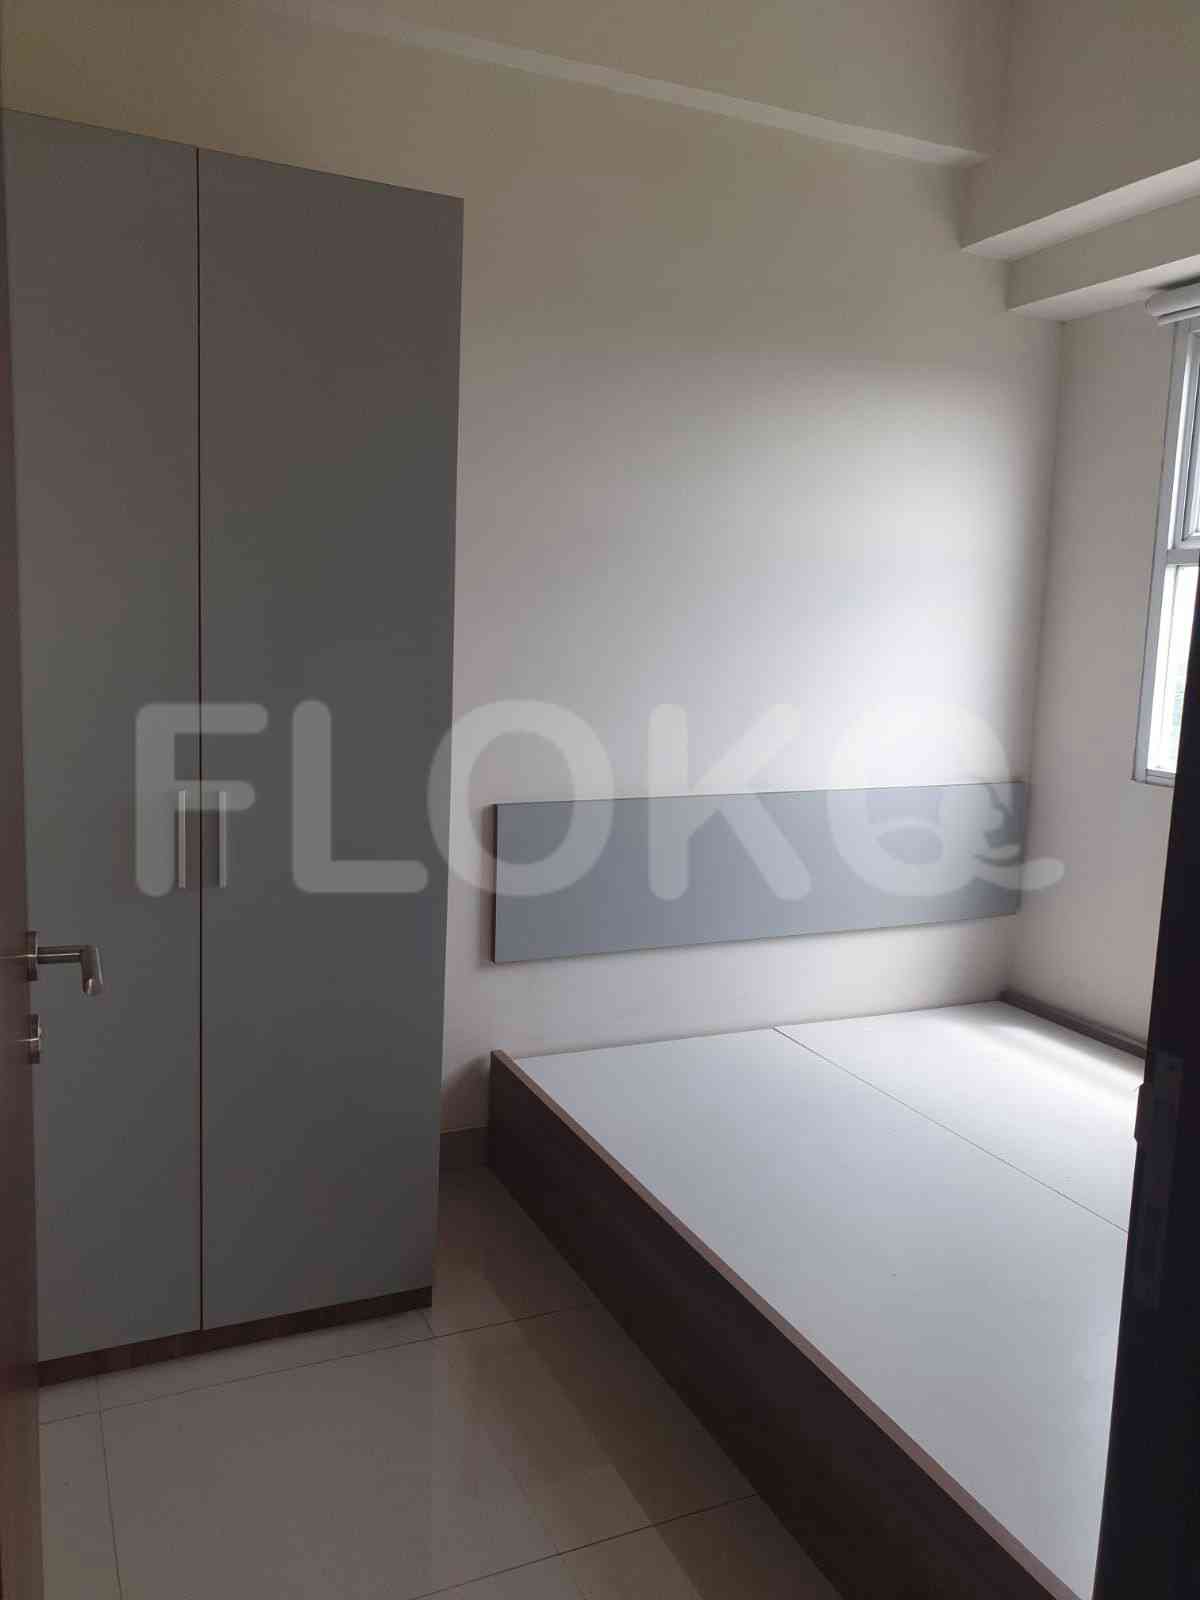 2 Bedroom on 18th Floor for Rent in Parkland Avenue Apartment - fbse90 8